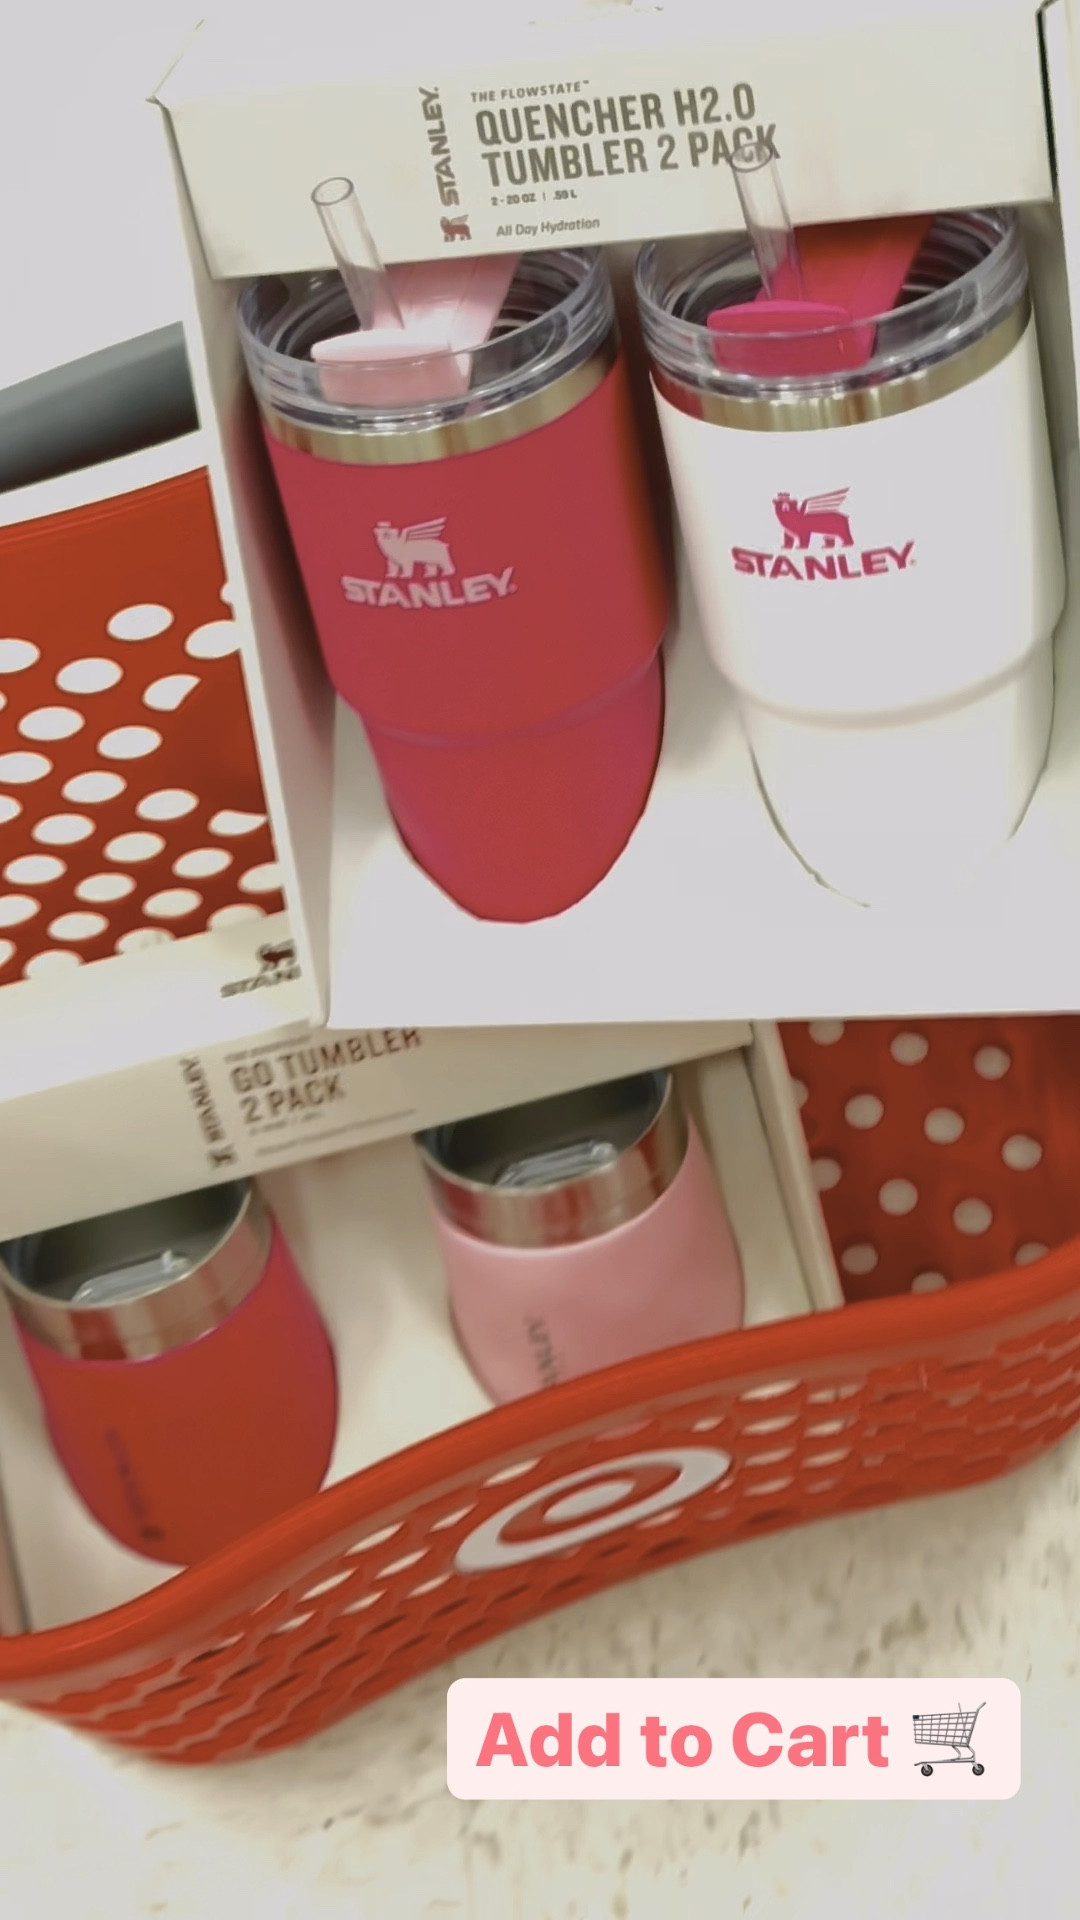 The viral Stanley tumbler comes in 2 new glossy colors and finishes